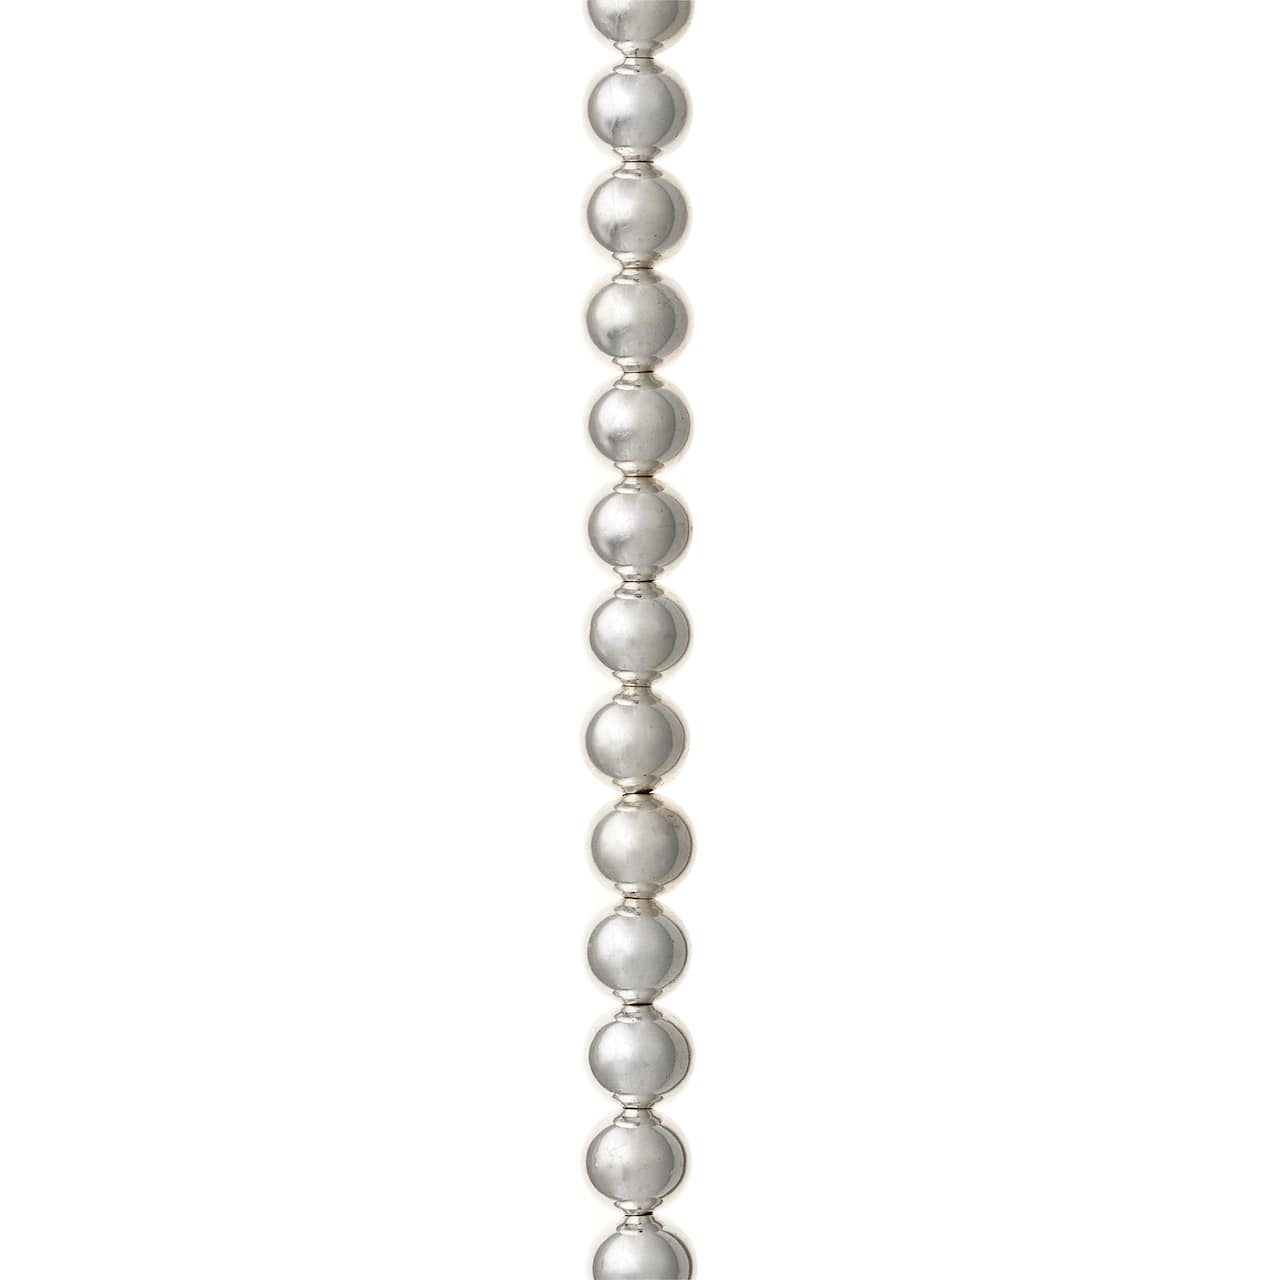 Sterling Silver-Plated Round Beads by Bead Landing™